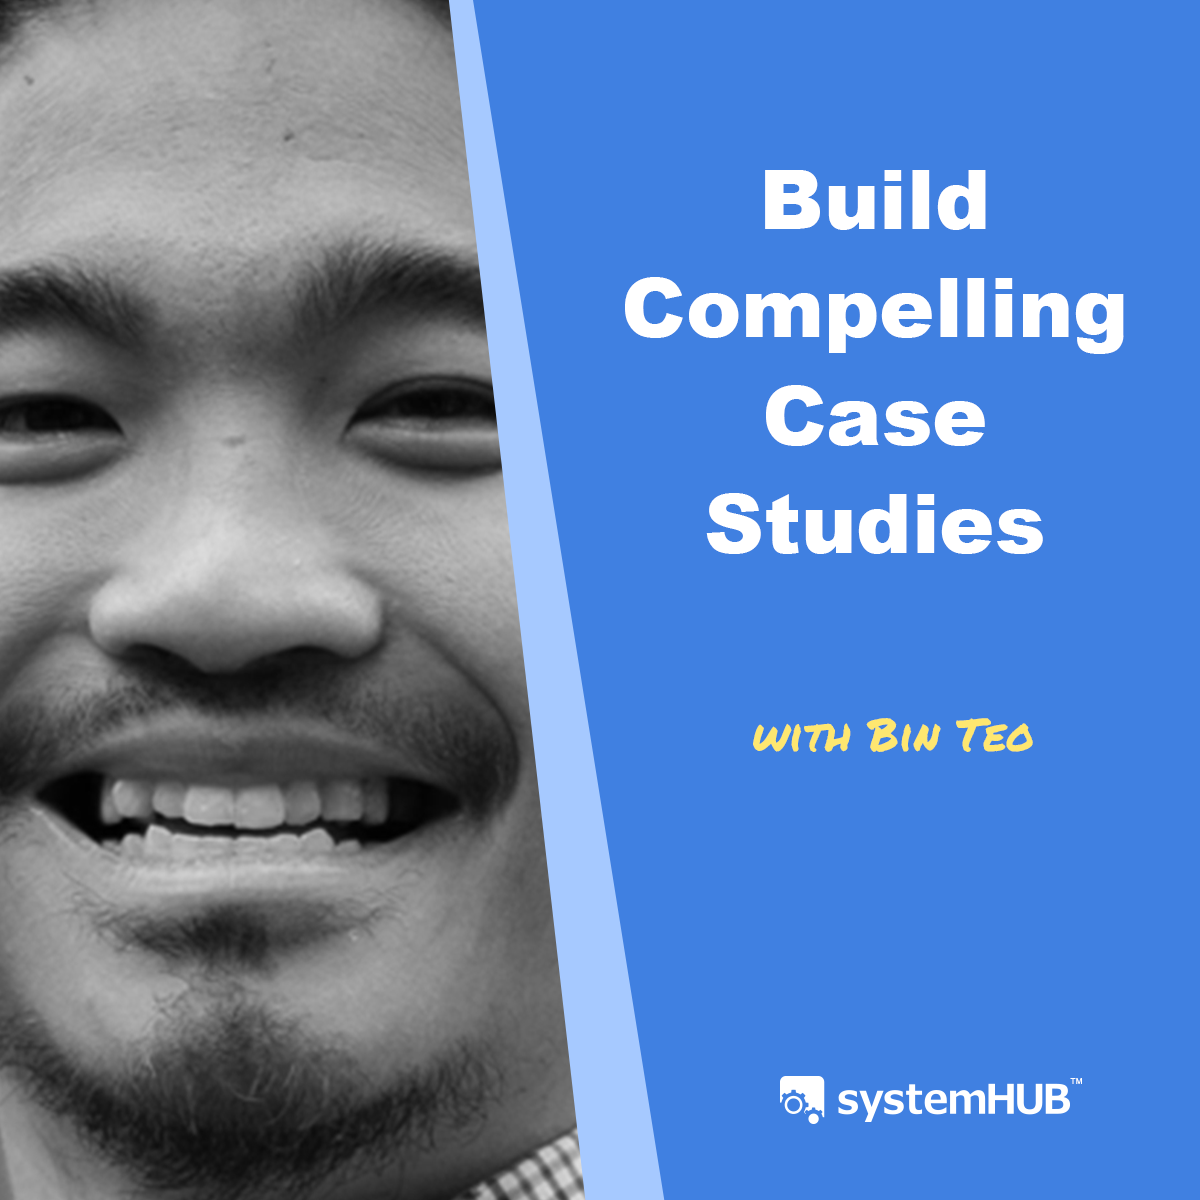 The System For Building Compelling Case Studies That Convert Prospects To Buyers with Bin Teo